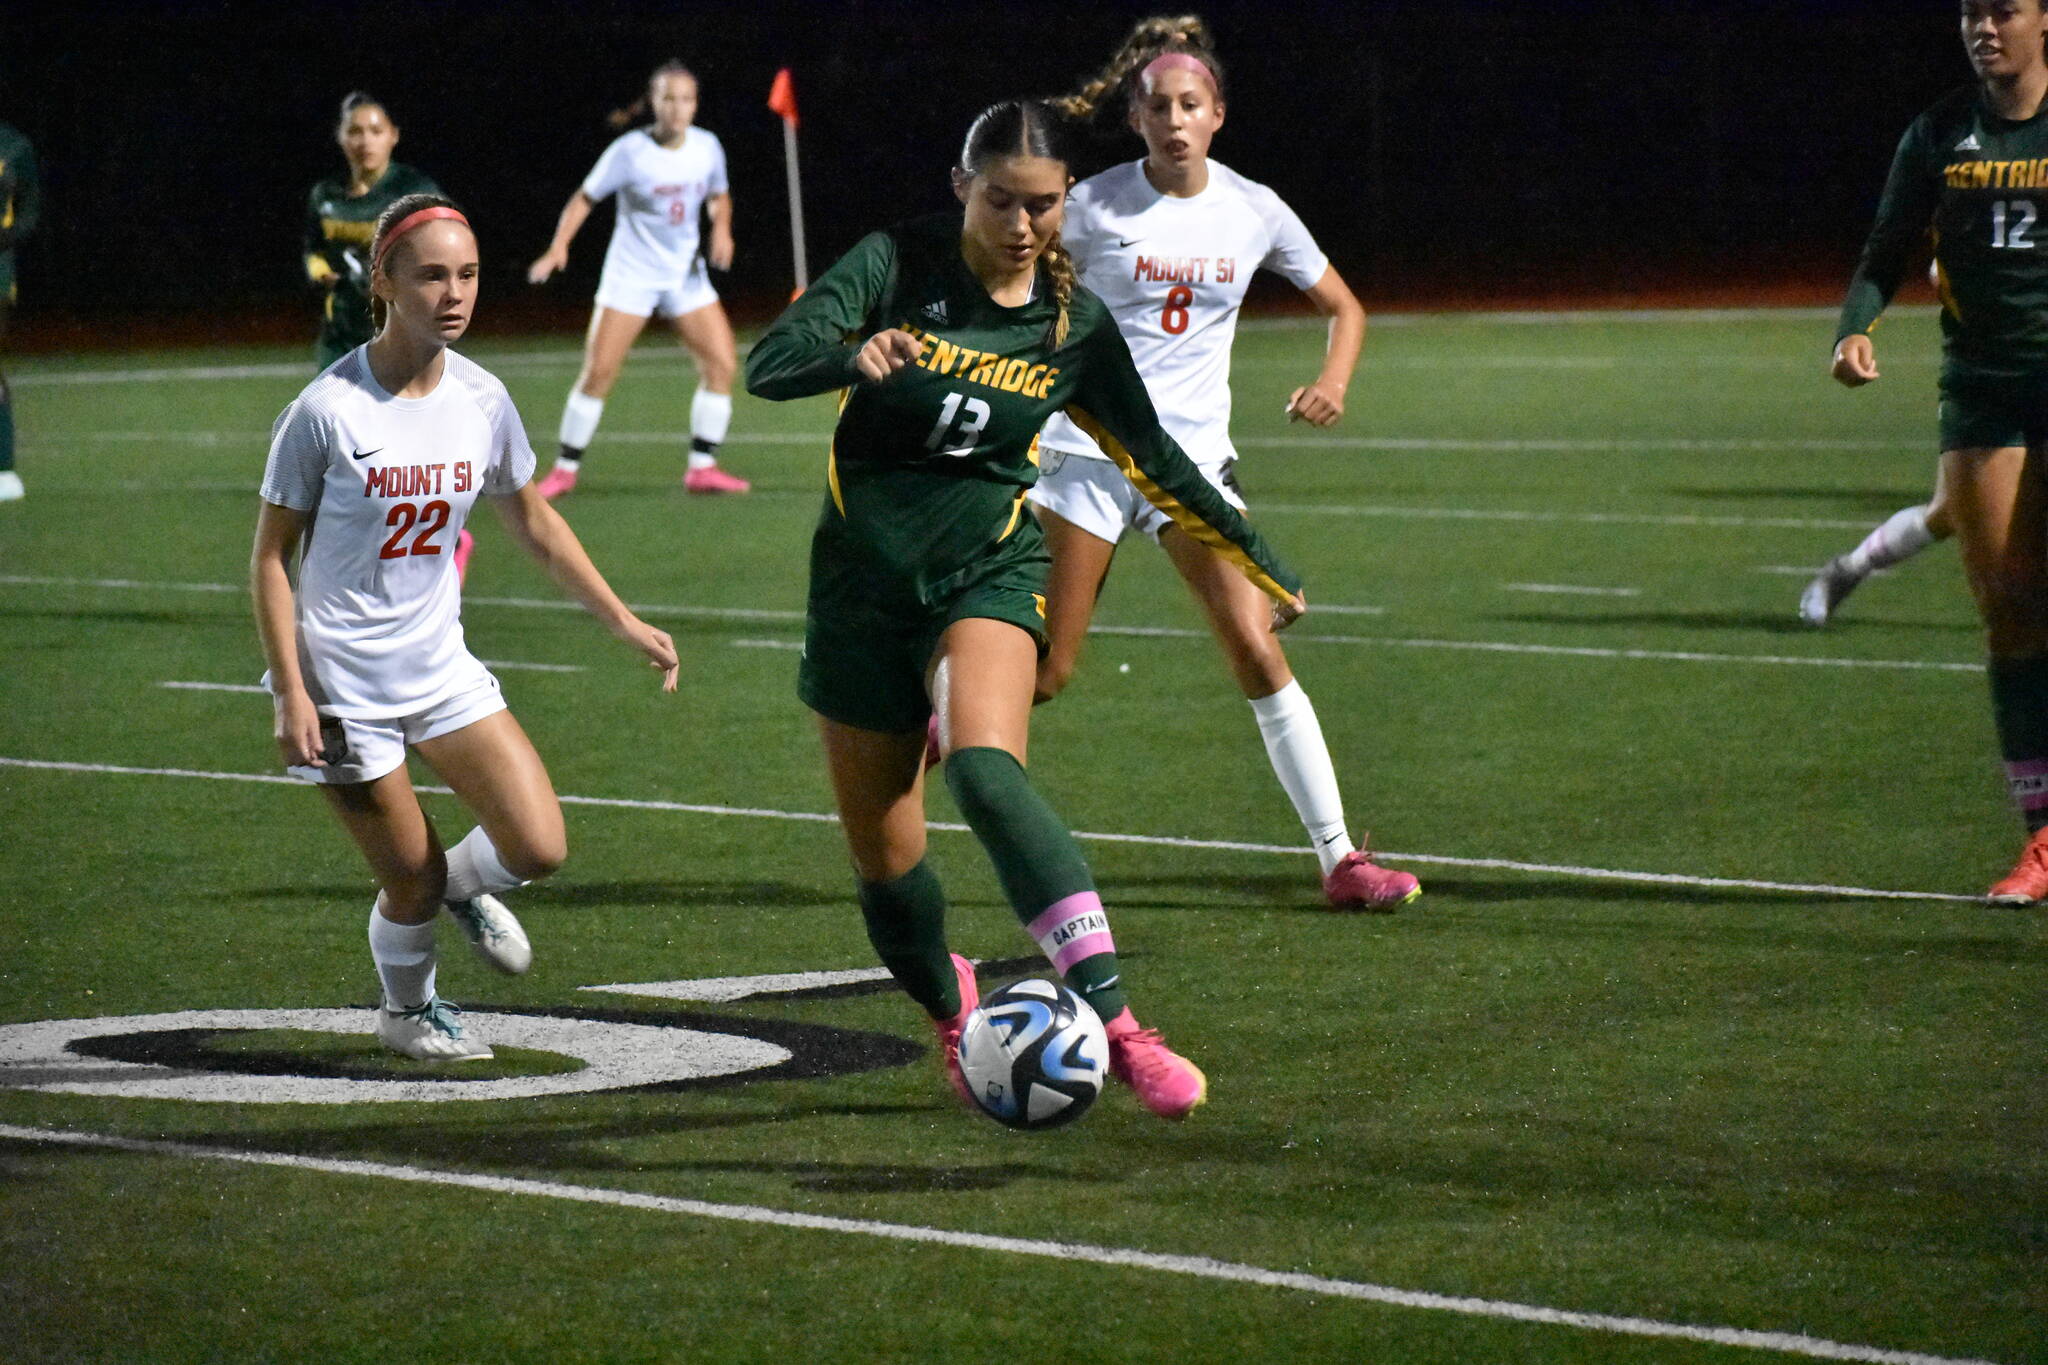 Senior Ella Schug with the ball at her feet. Ben Ray / The Reporter